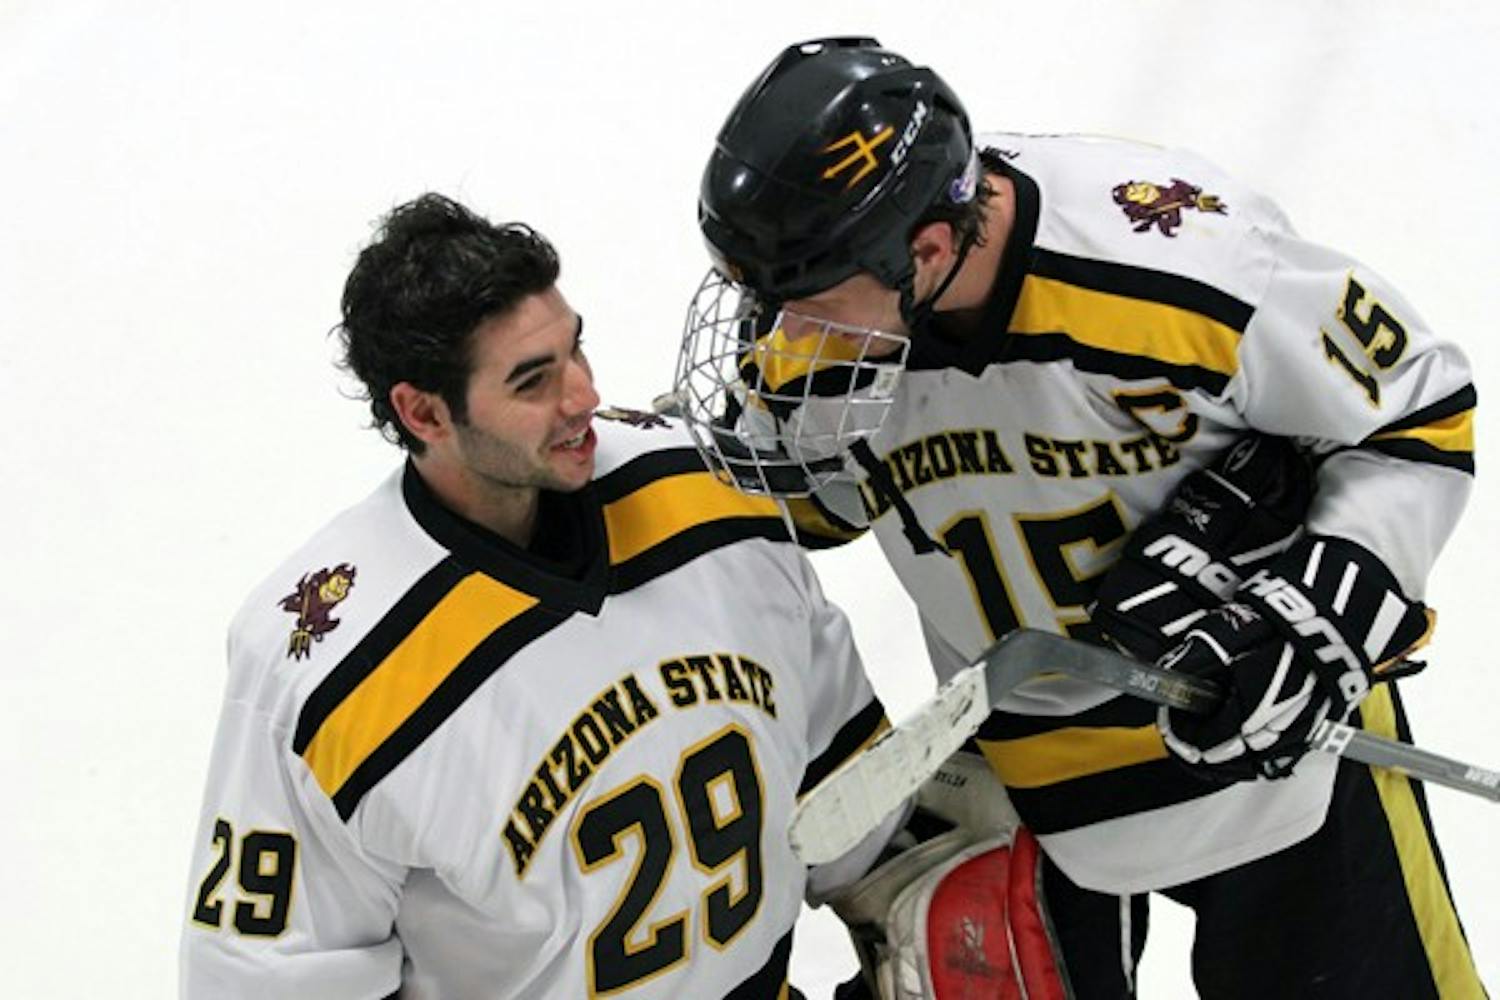 Goaltender Joe D’Elia talks to forward Colin Hekle during ASU’s win over Davenport on Jan. 18. In his first start for ASU, D’Elia recorded a win and shutout over his former team. (Photo by Lisa Bartoli)